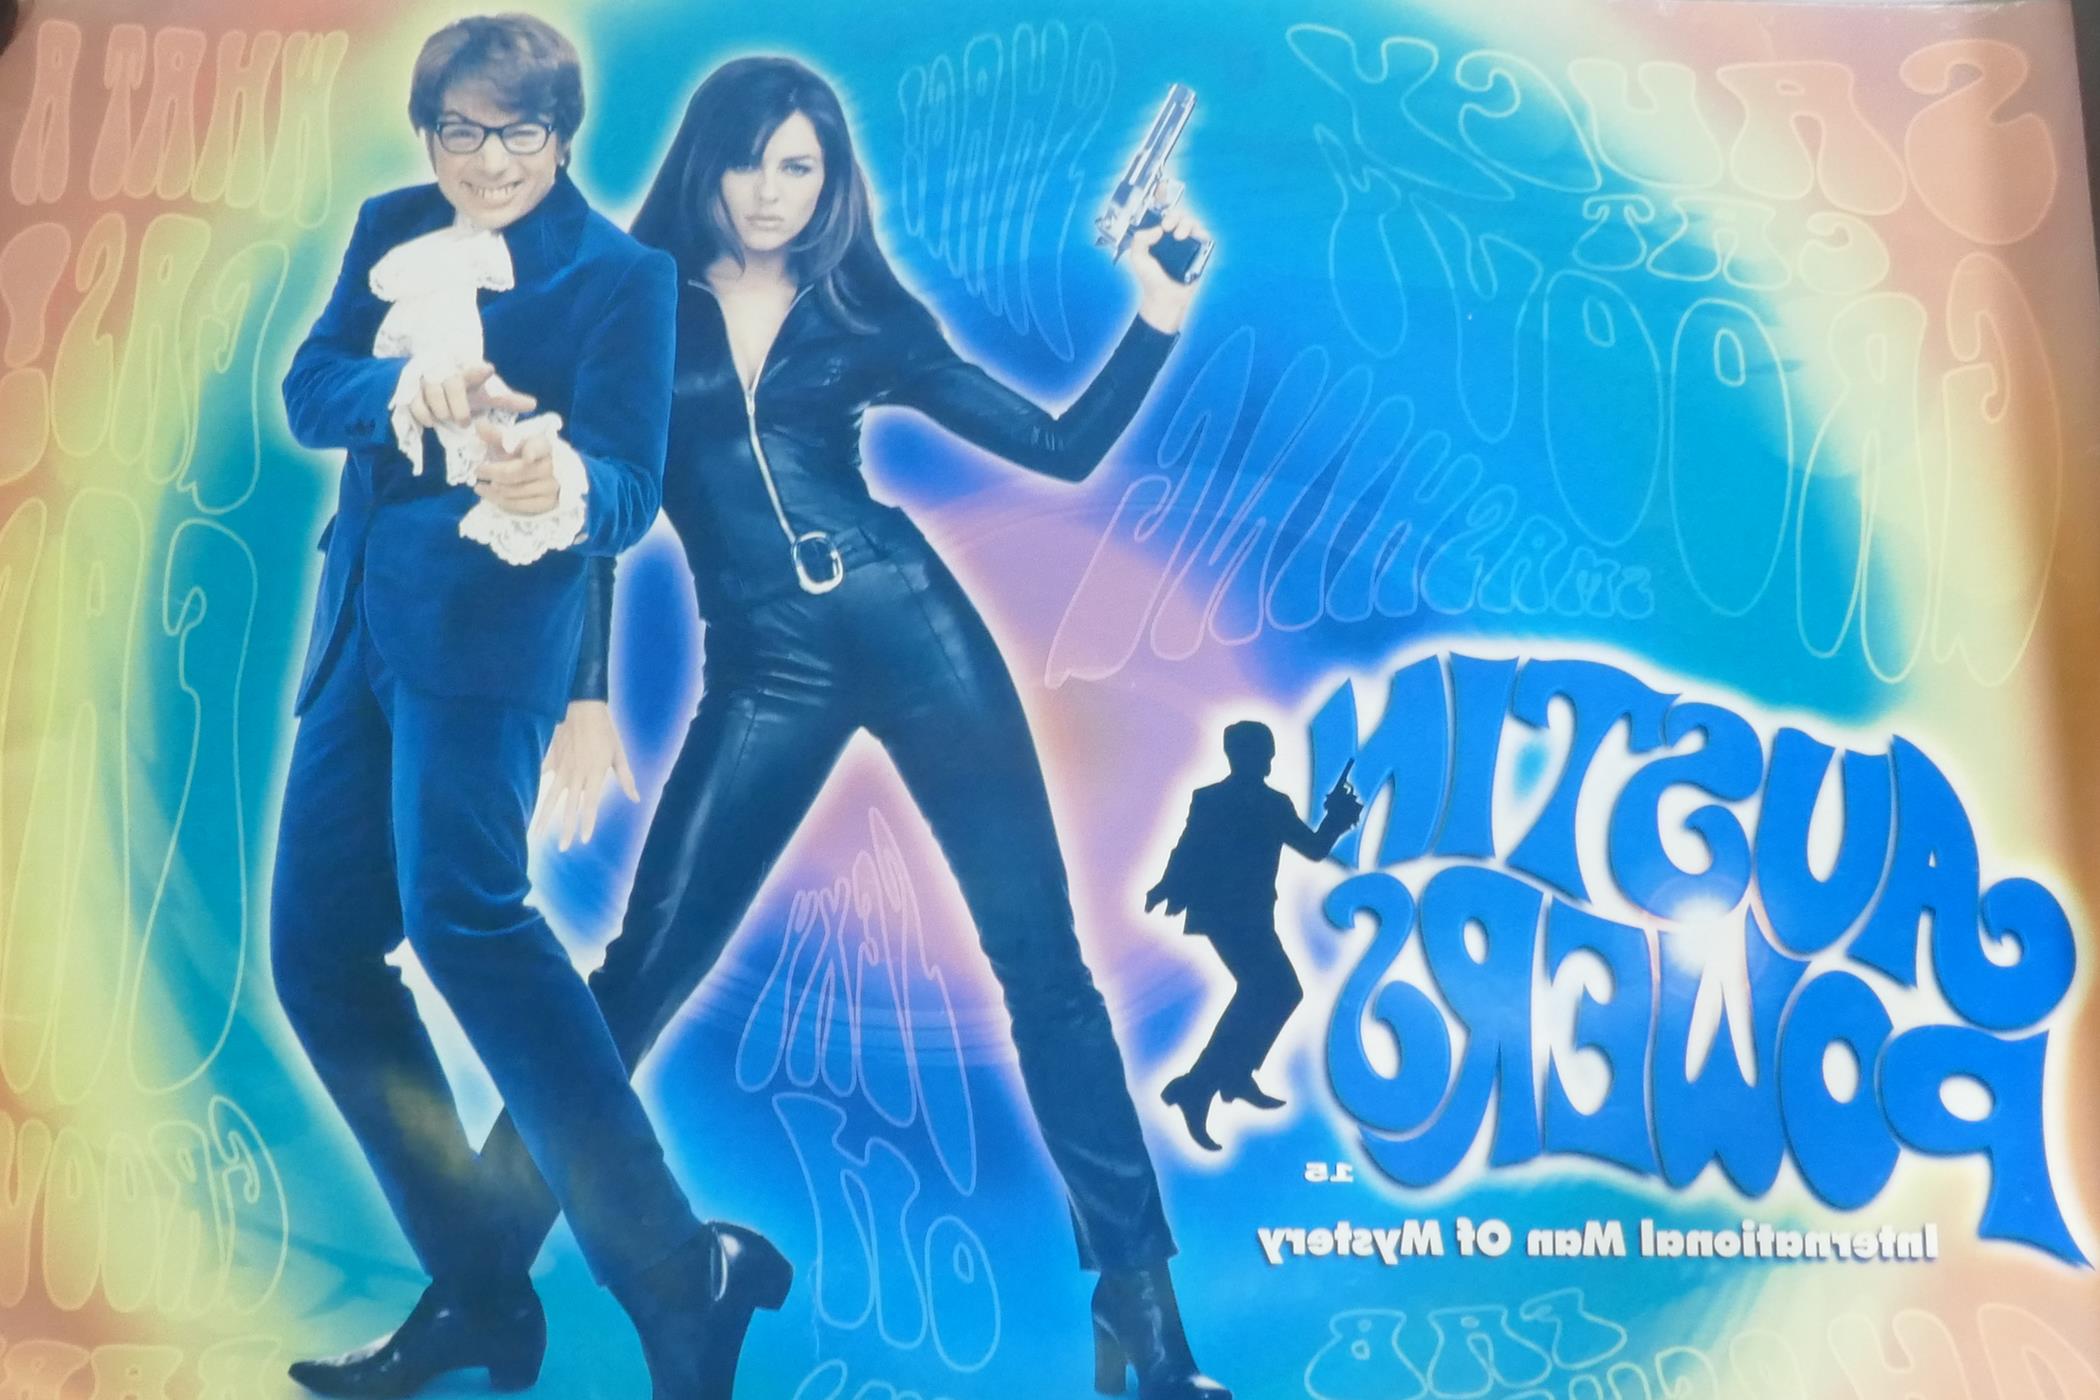 Austin Powers, International Man of Mystery 1997 double sided film poster, 76 x 101cm - Image 2 of 2